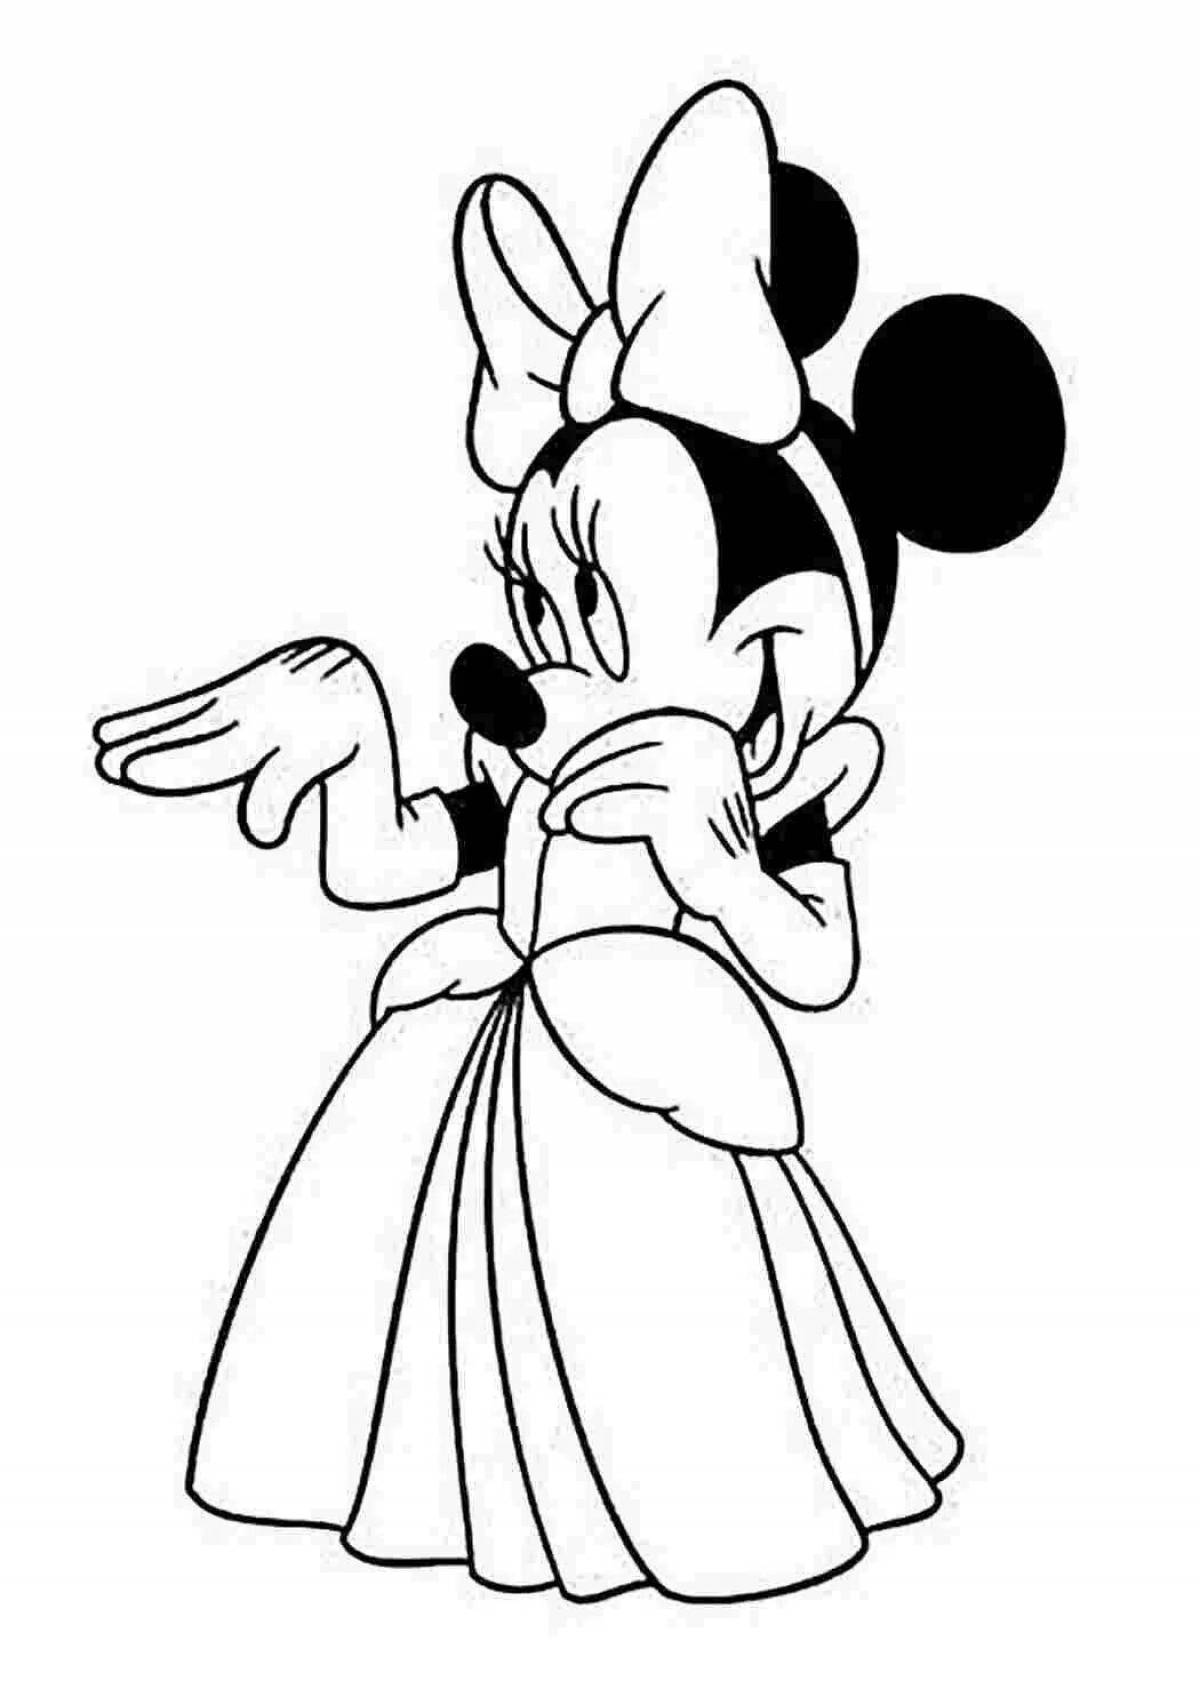 Minnie mouse incredible coloring book